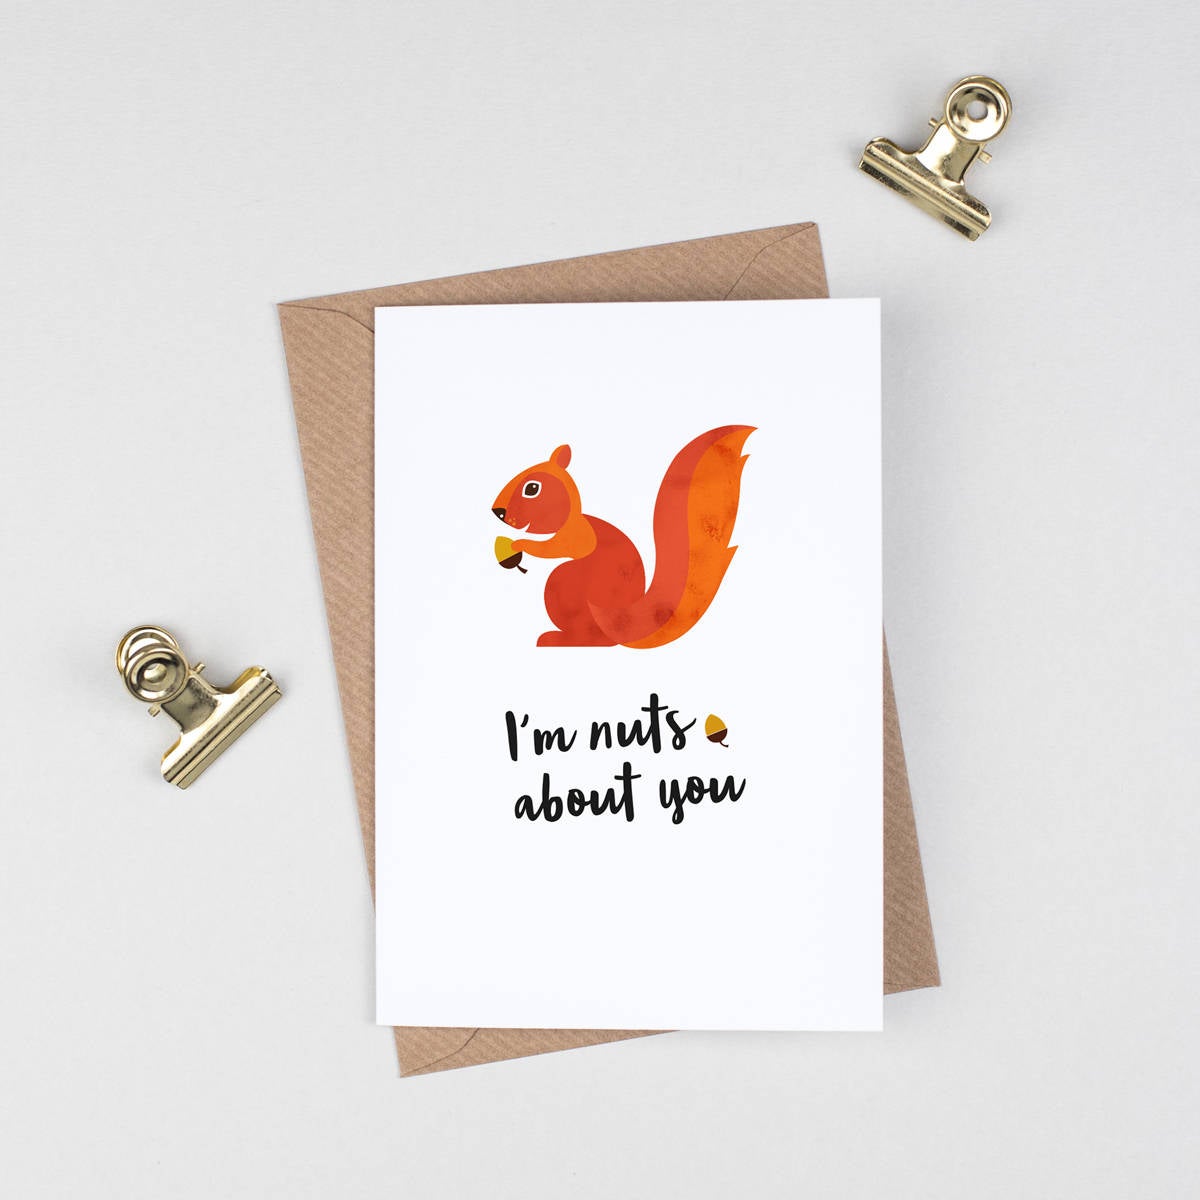 Funny Valentine's Card, Squirrel Love Card, Nuts About You, Romantic Animal Pun Card For Boyfriend Girlfriend, Anniversary, Laura Danby